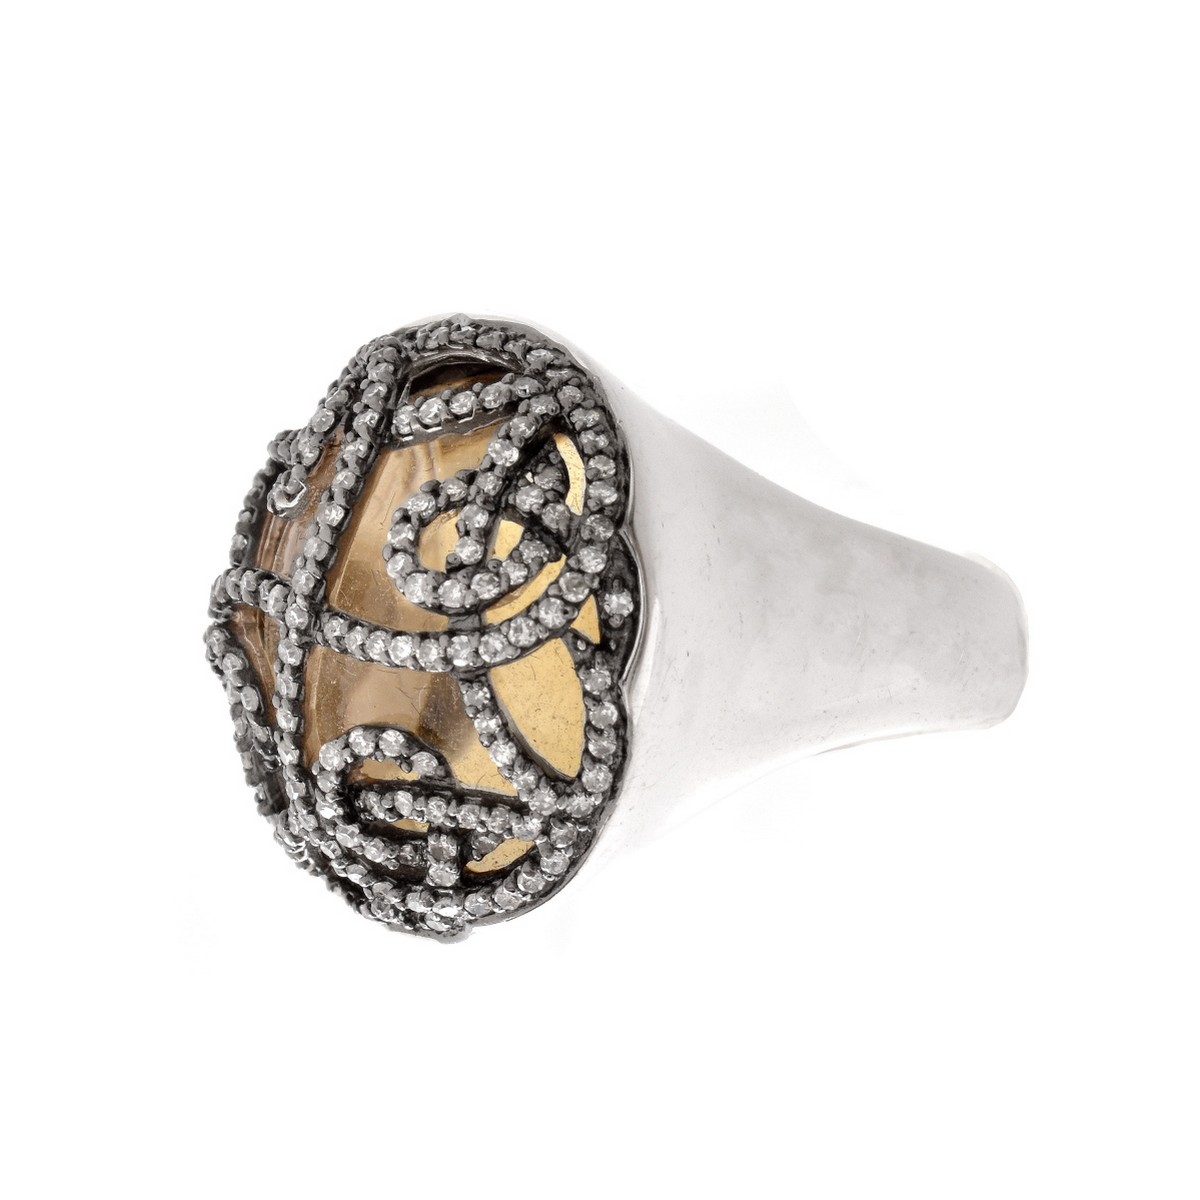 Nicole Miller Diamond and 14K Gold Ring